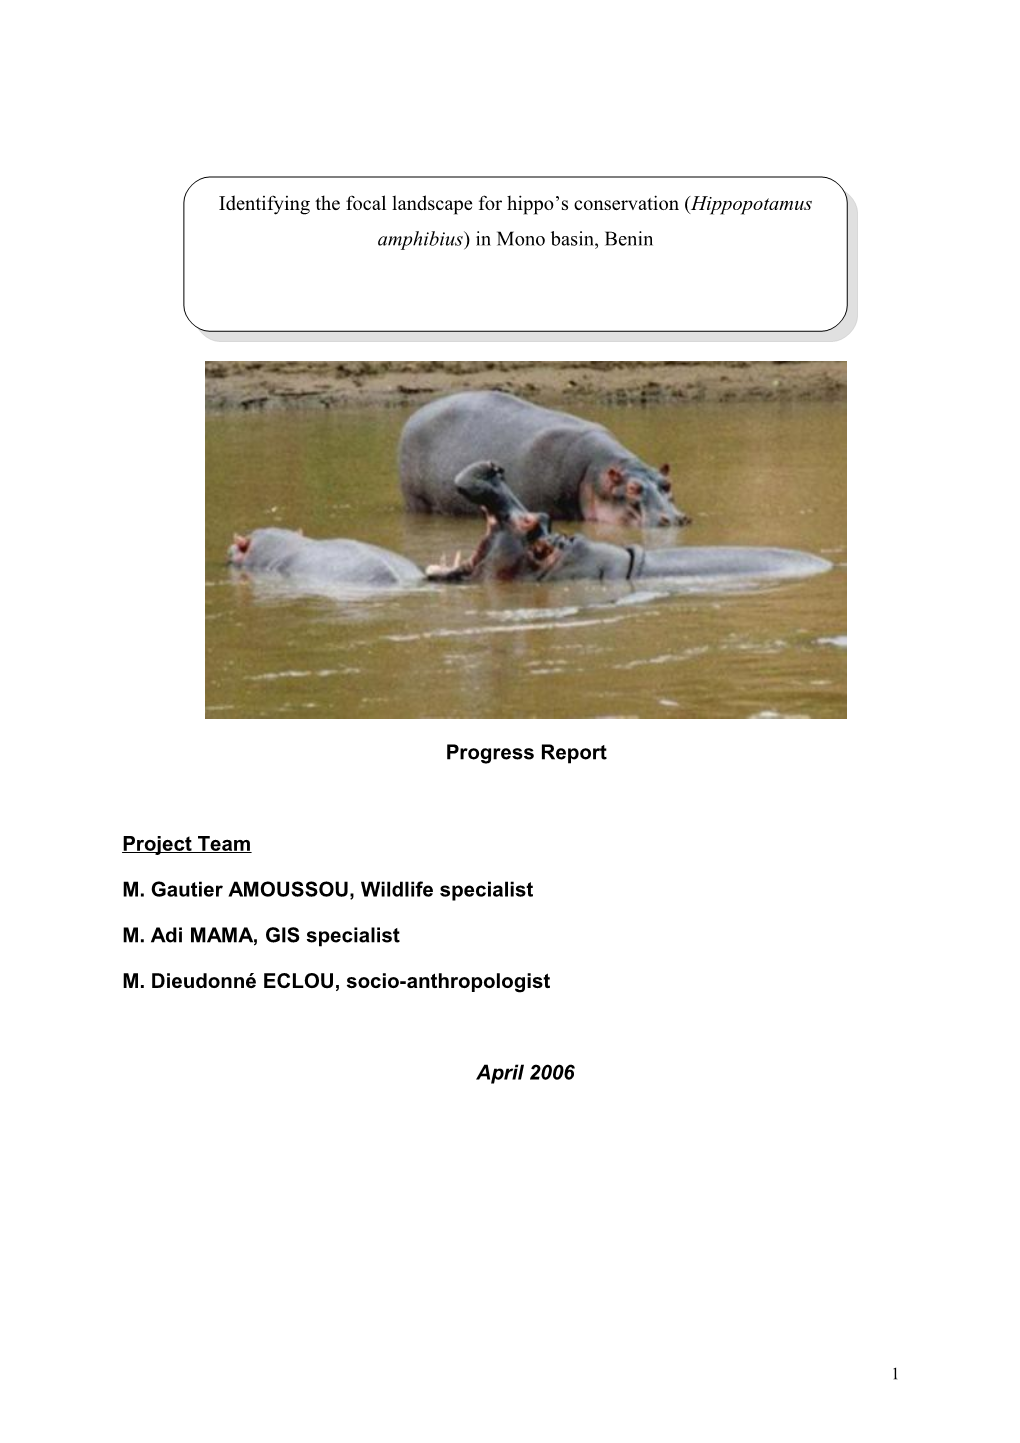 Distribution of Hippos in Mono Basin